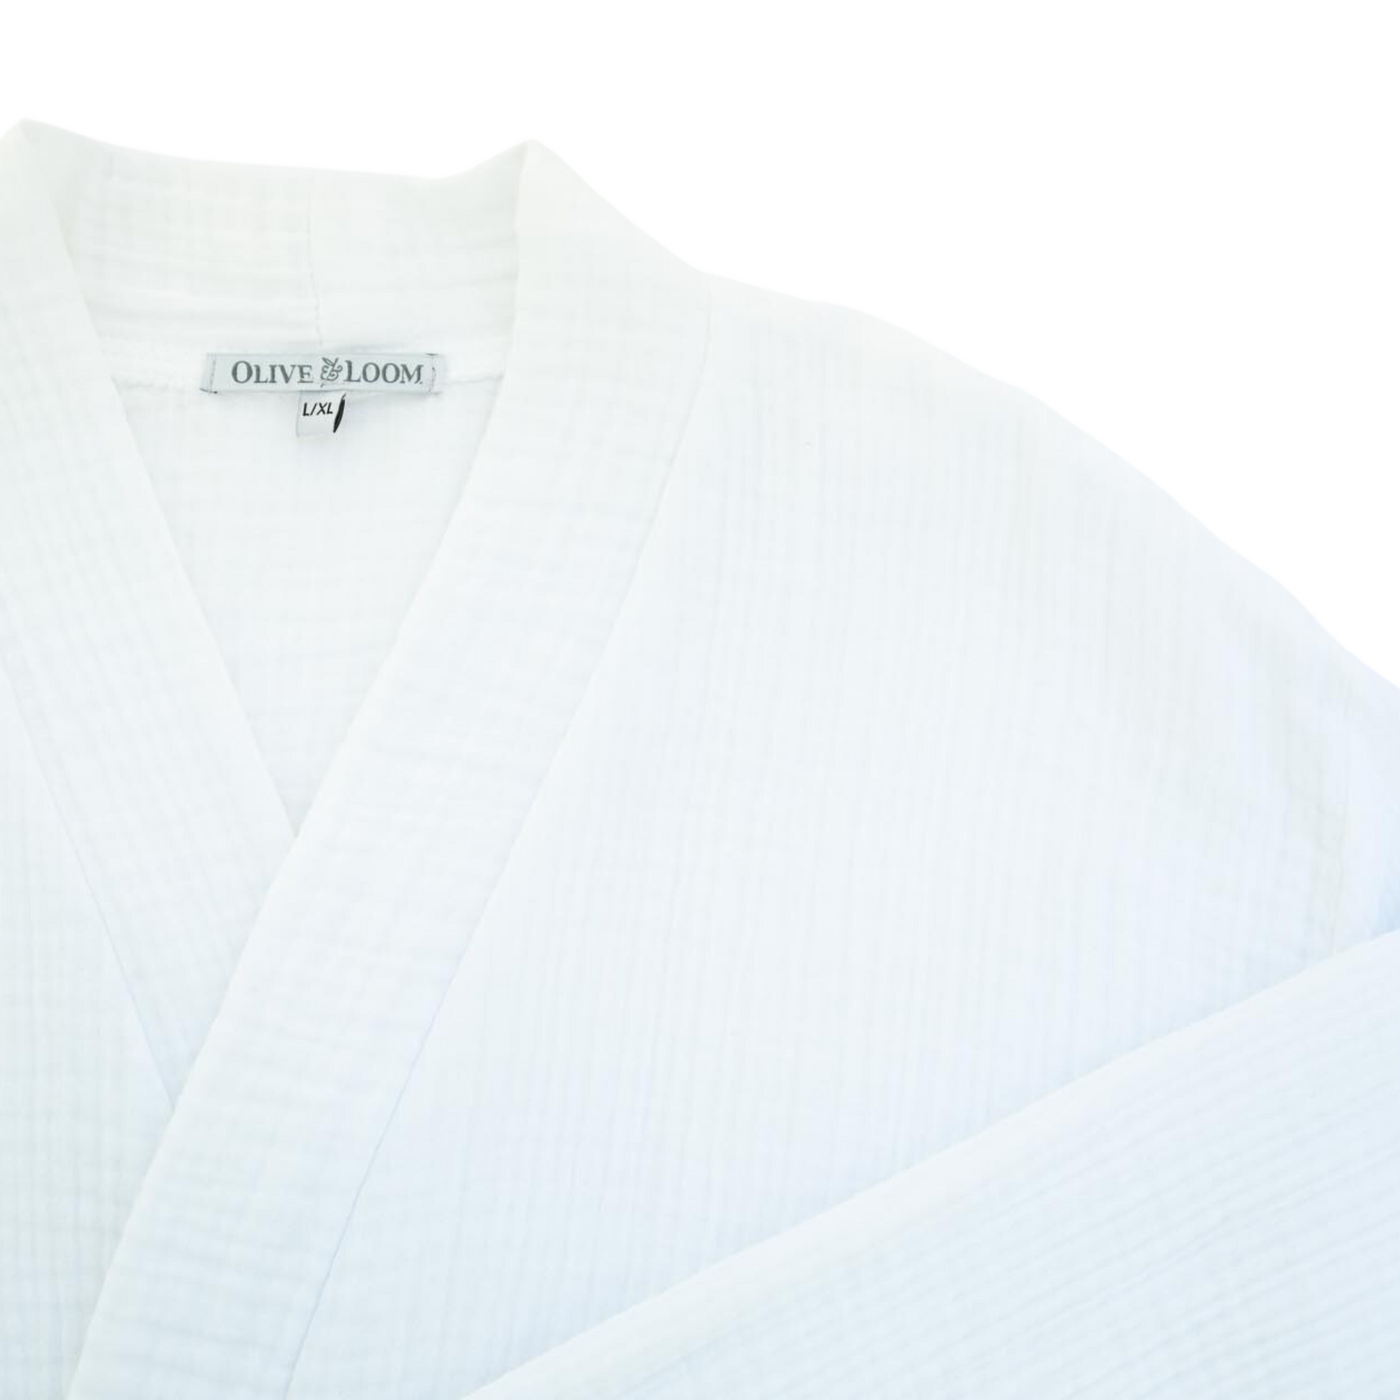 Embroidered Spa Robe